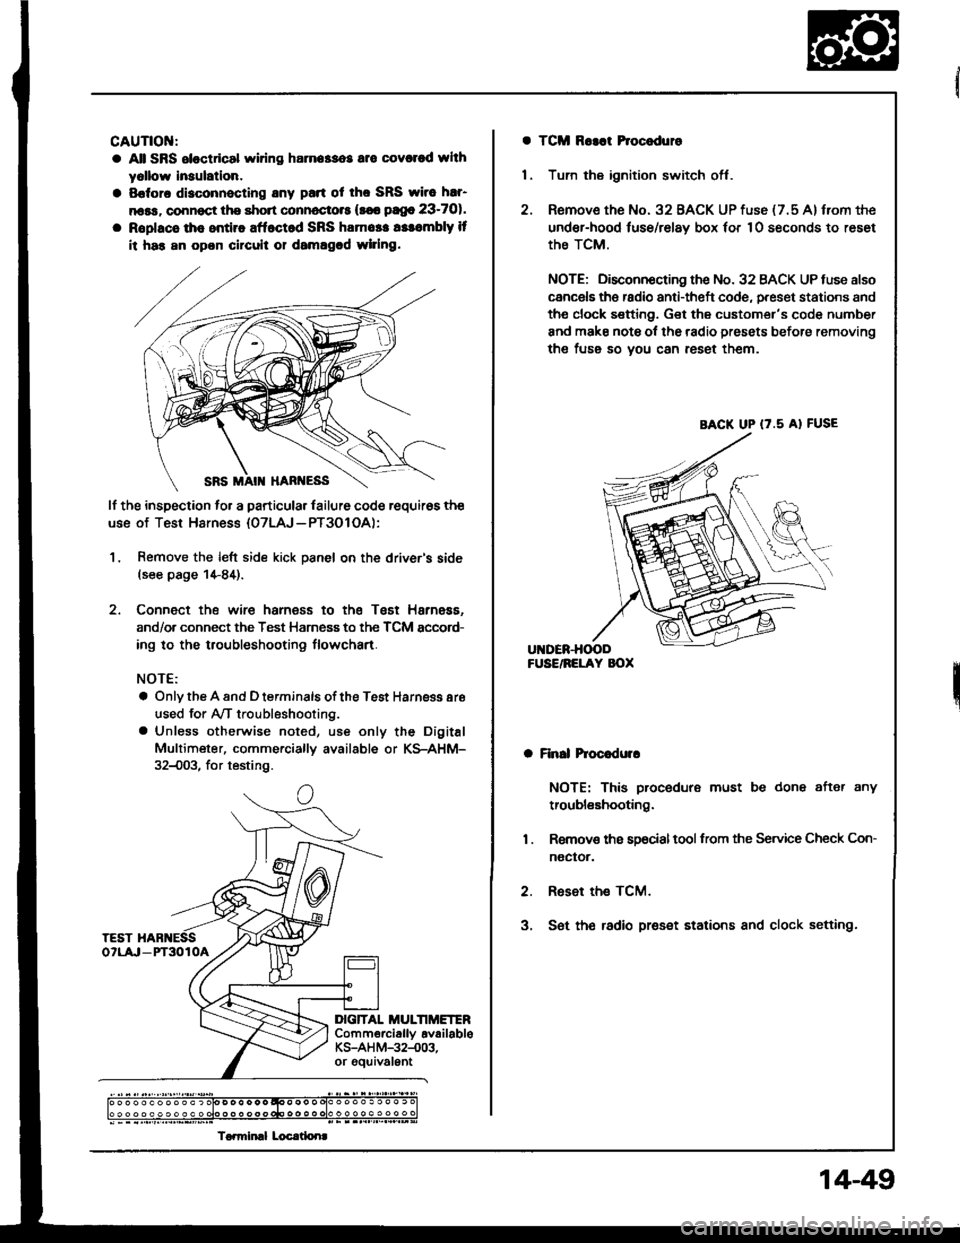 ACURA INTEGRA 1994  Service Repair Manual CAUTIOI{:
a All SRS eloctdcal wiring harna$os are covcred whh
yollow lnaulation.
a Sofora disconnecting any pan ot tho SRS wirc har
n6ss, connoct the short connoctots (s€6 pago 23-701.
a Roplacs th